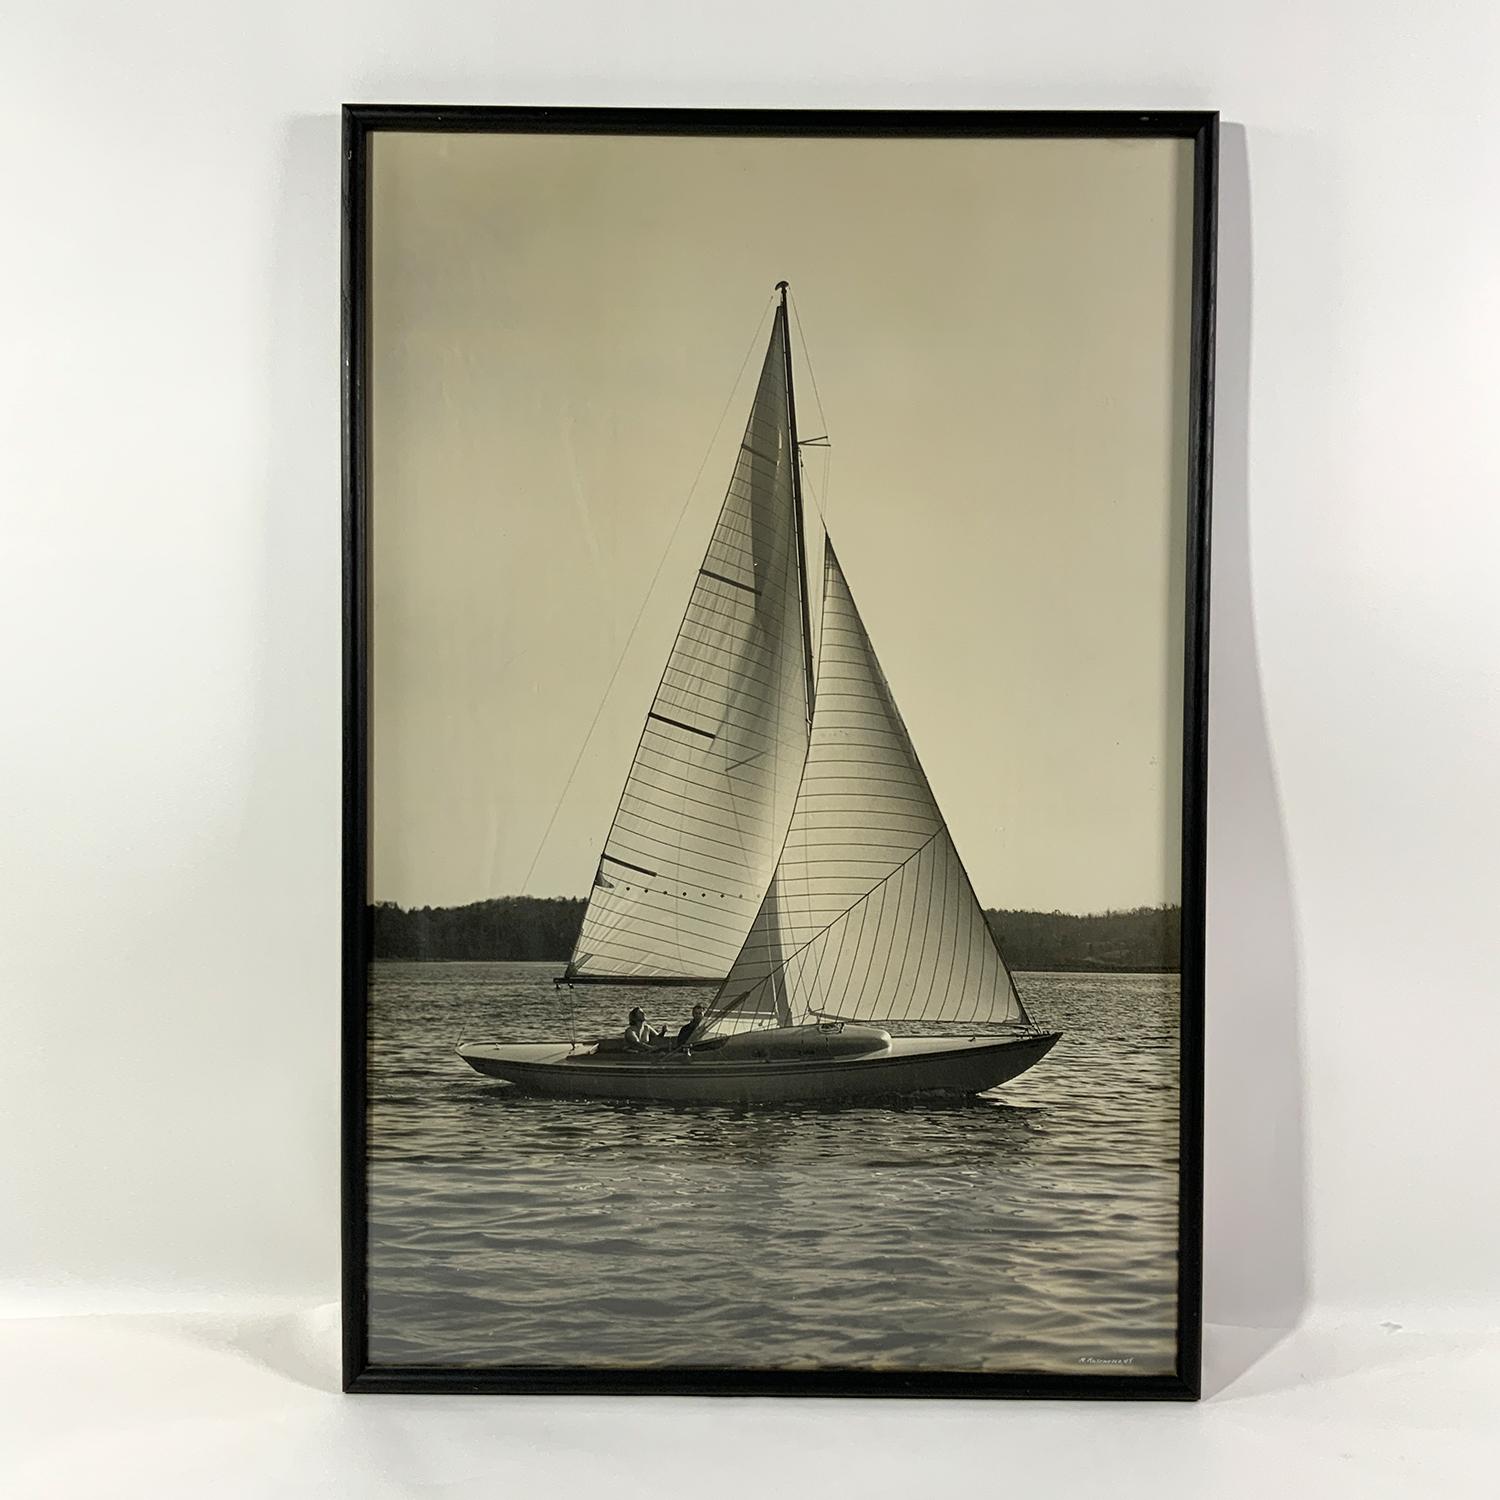 Morris Rosenfeld black and white photograph of a Marconi-Rigged sloop. Signed lower right 